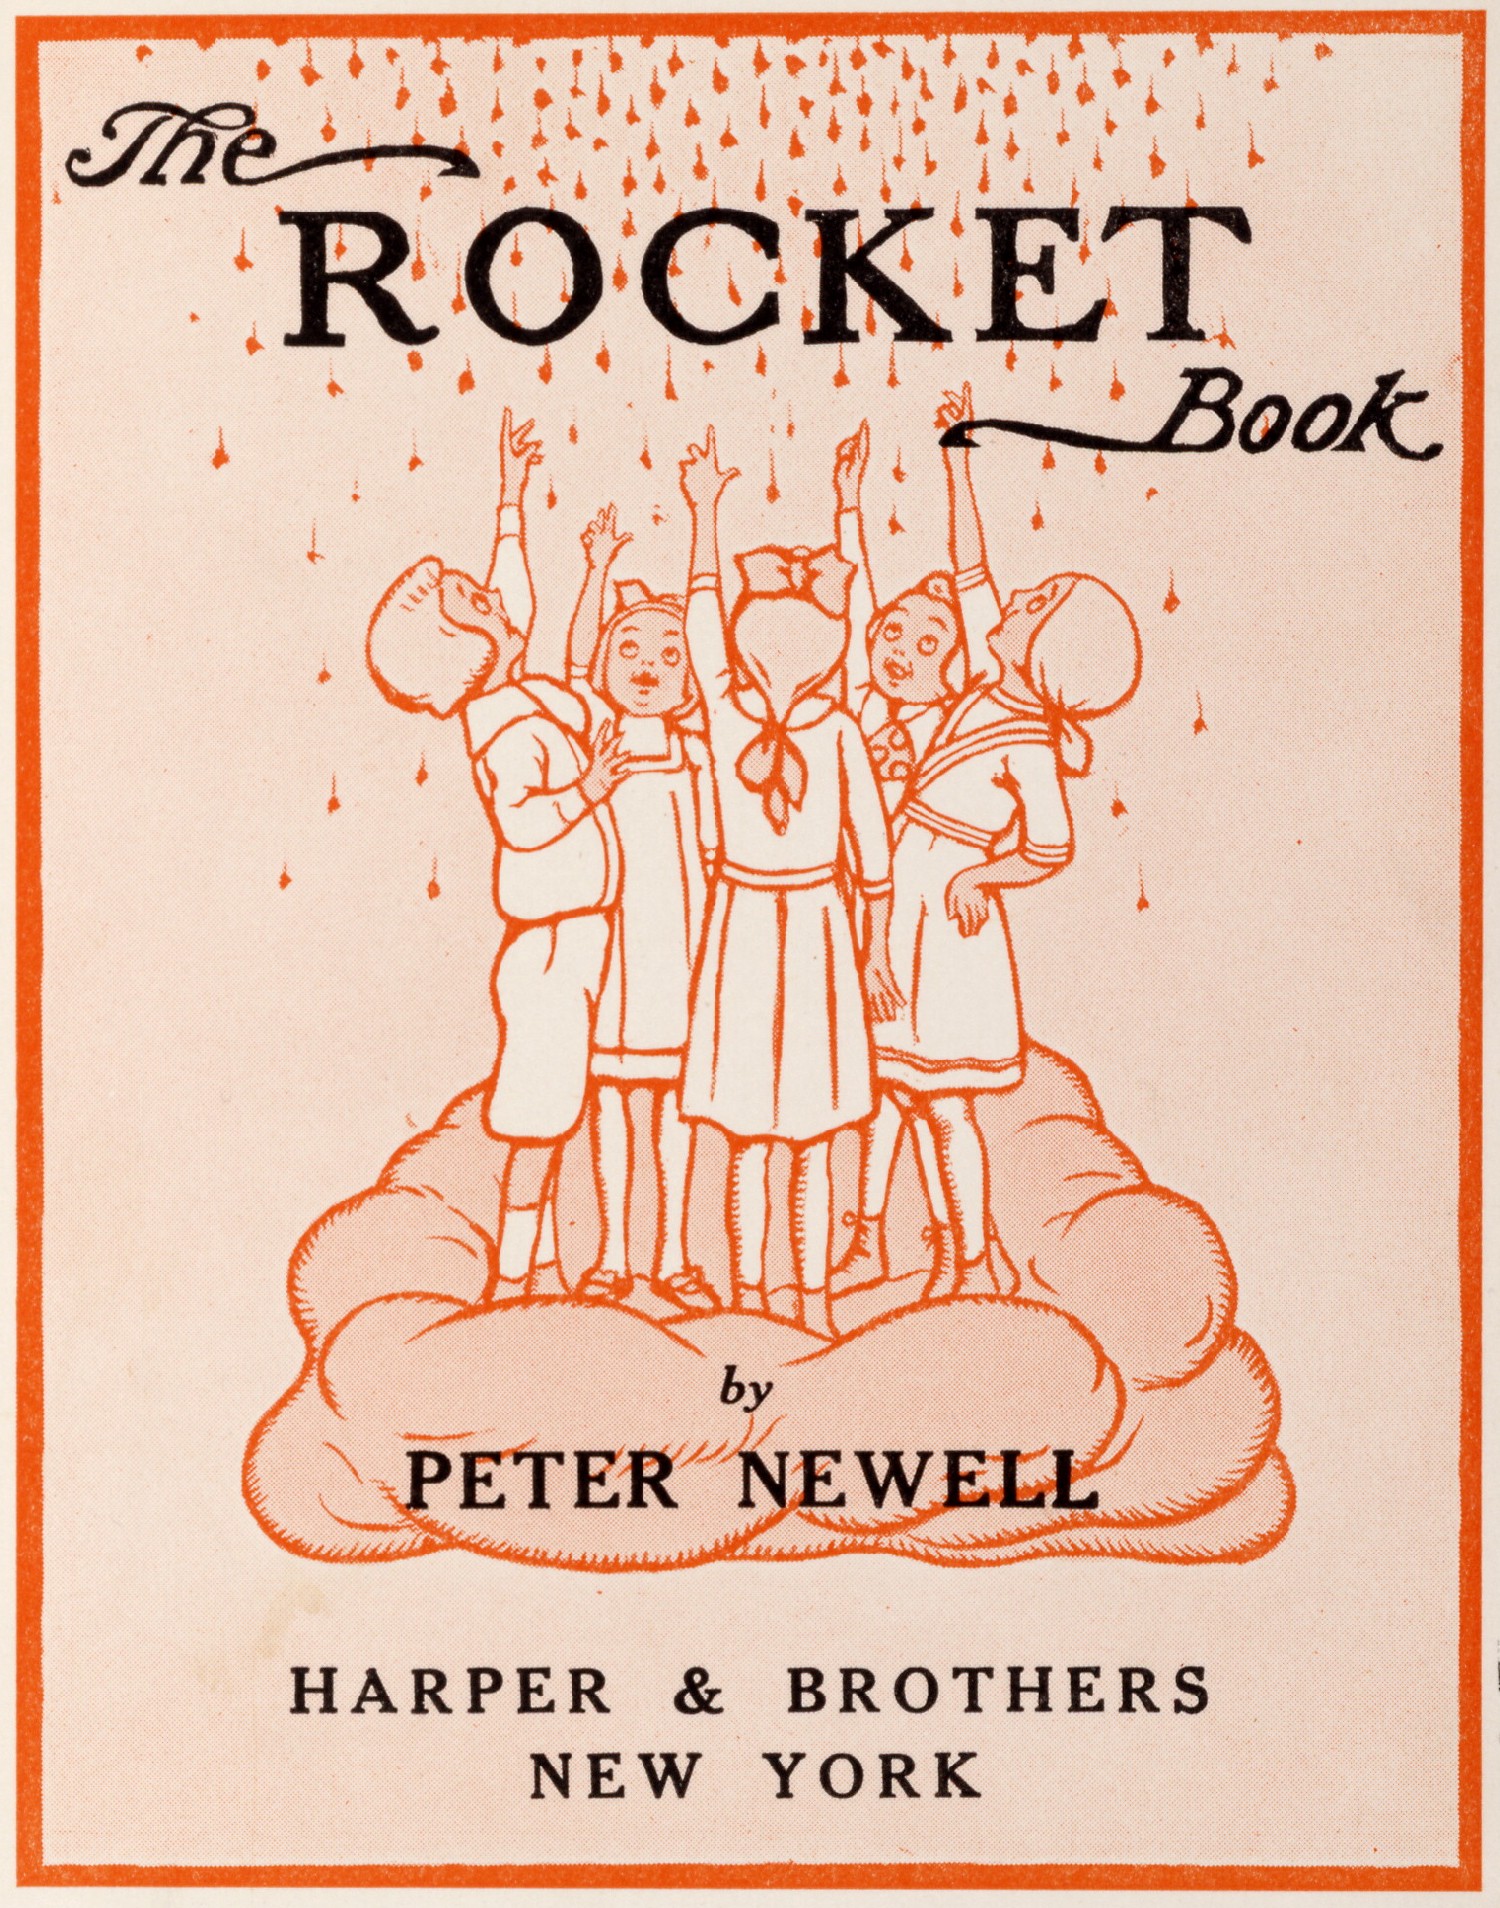 The Rocket Book 1912